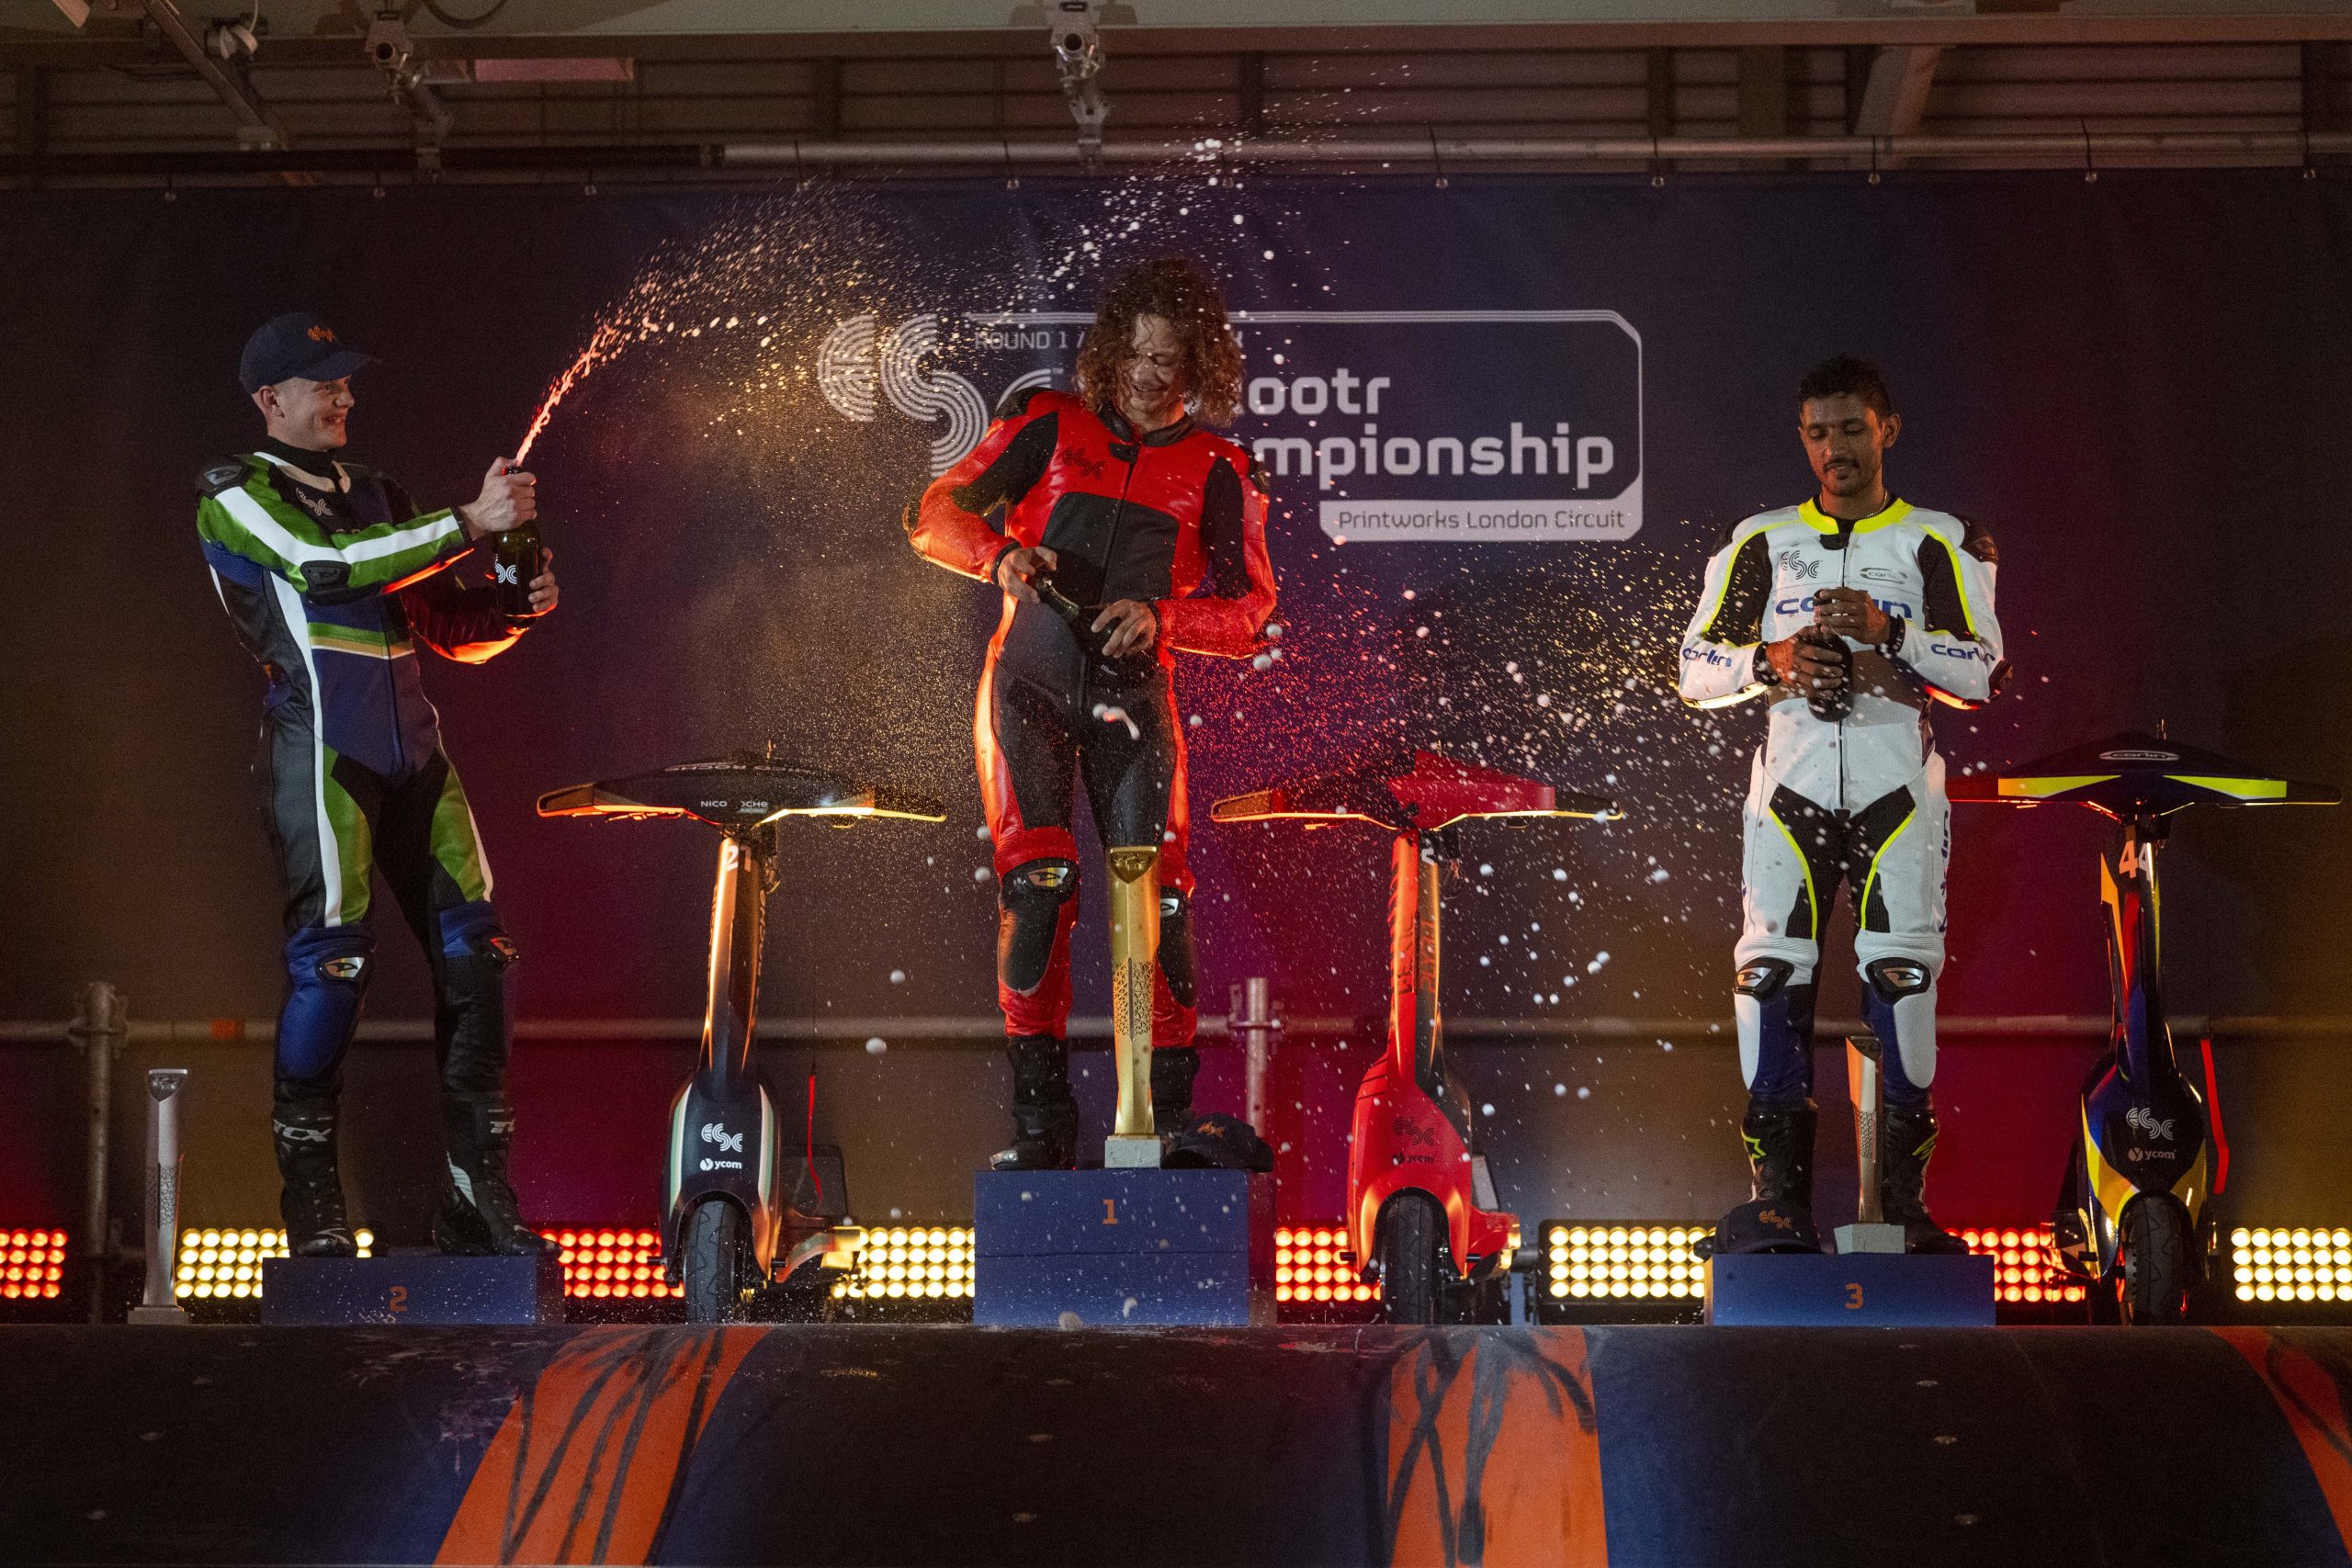 Freestyle scooter rider claims victory in first round of eSkootr Championship